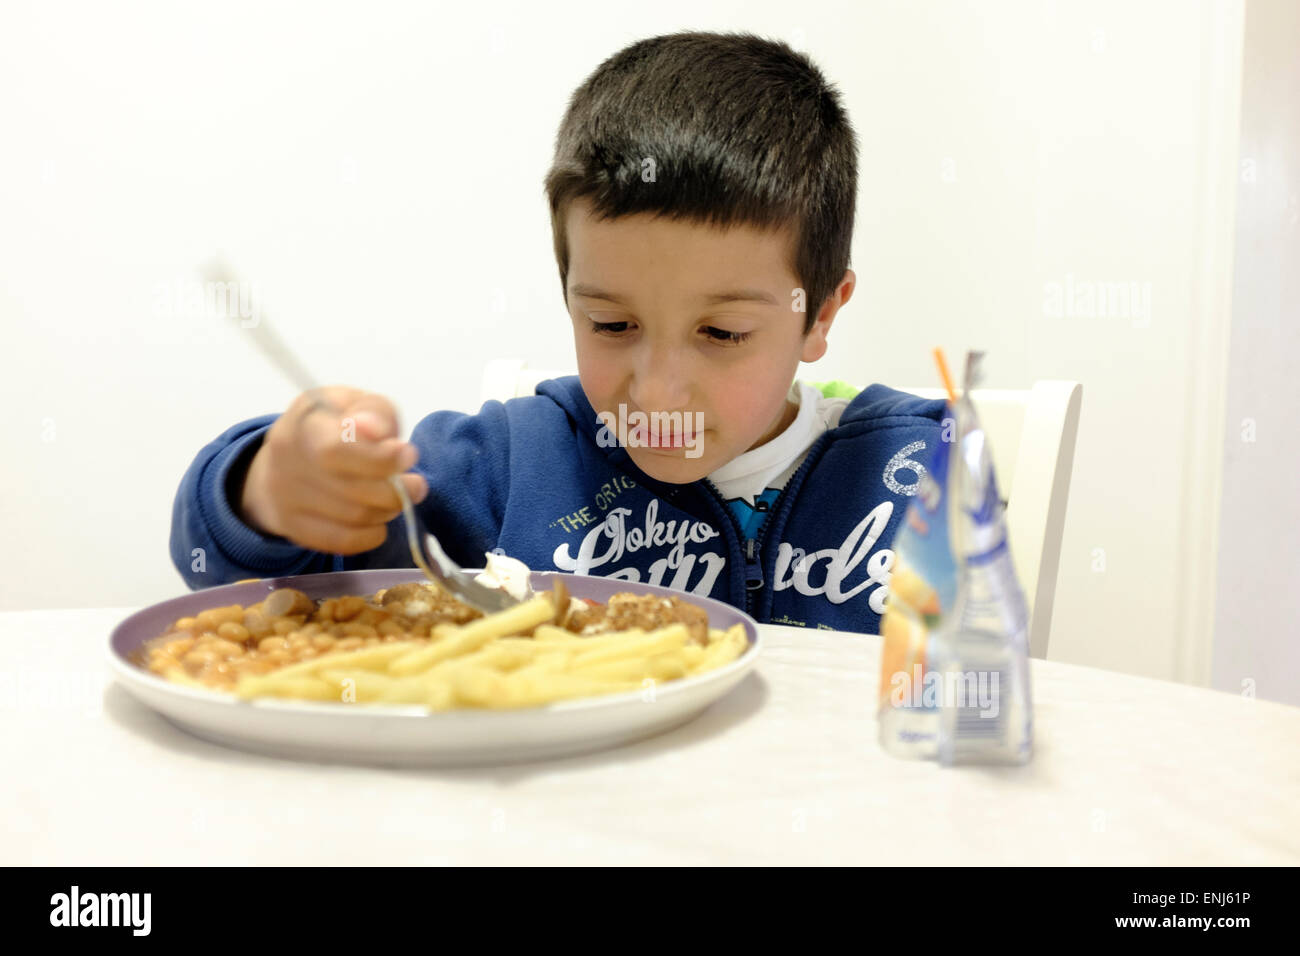 Child eating  fry-up  breakfast meal Stock Photo